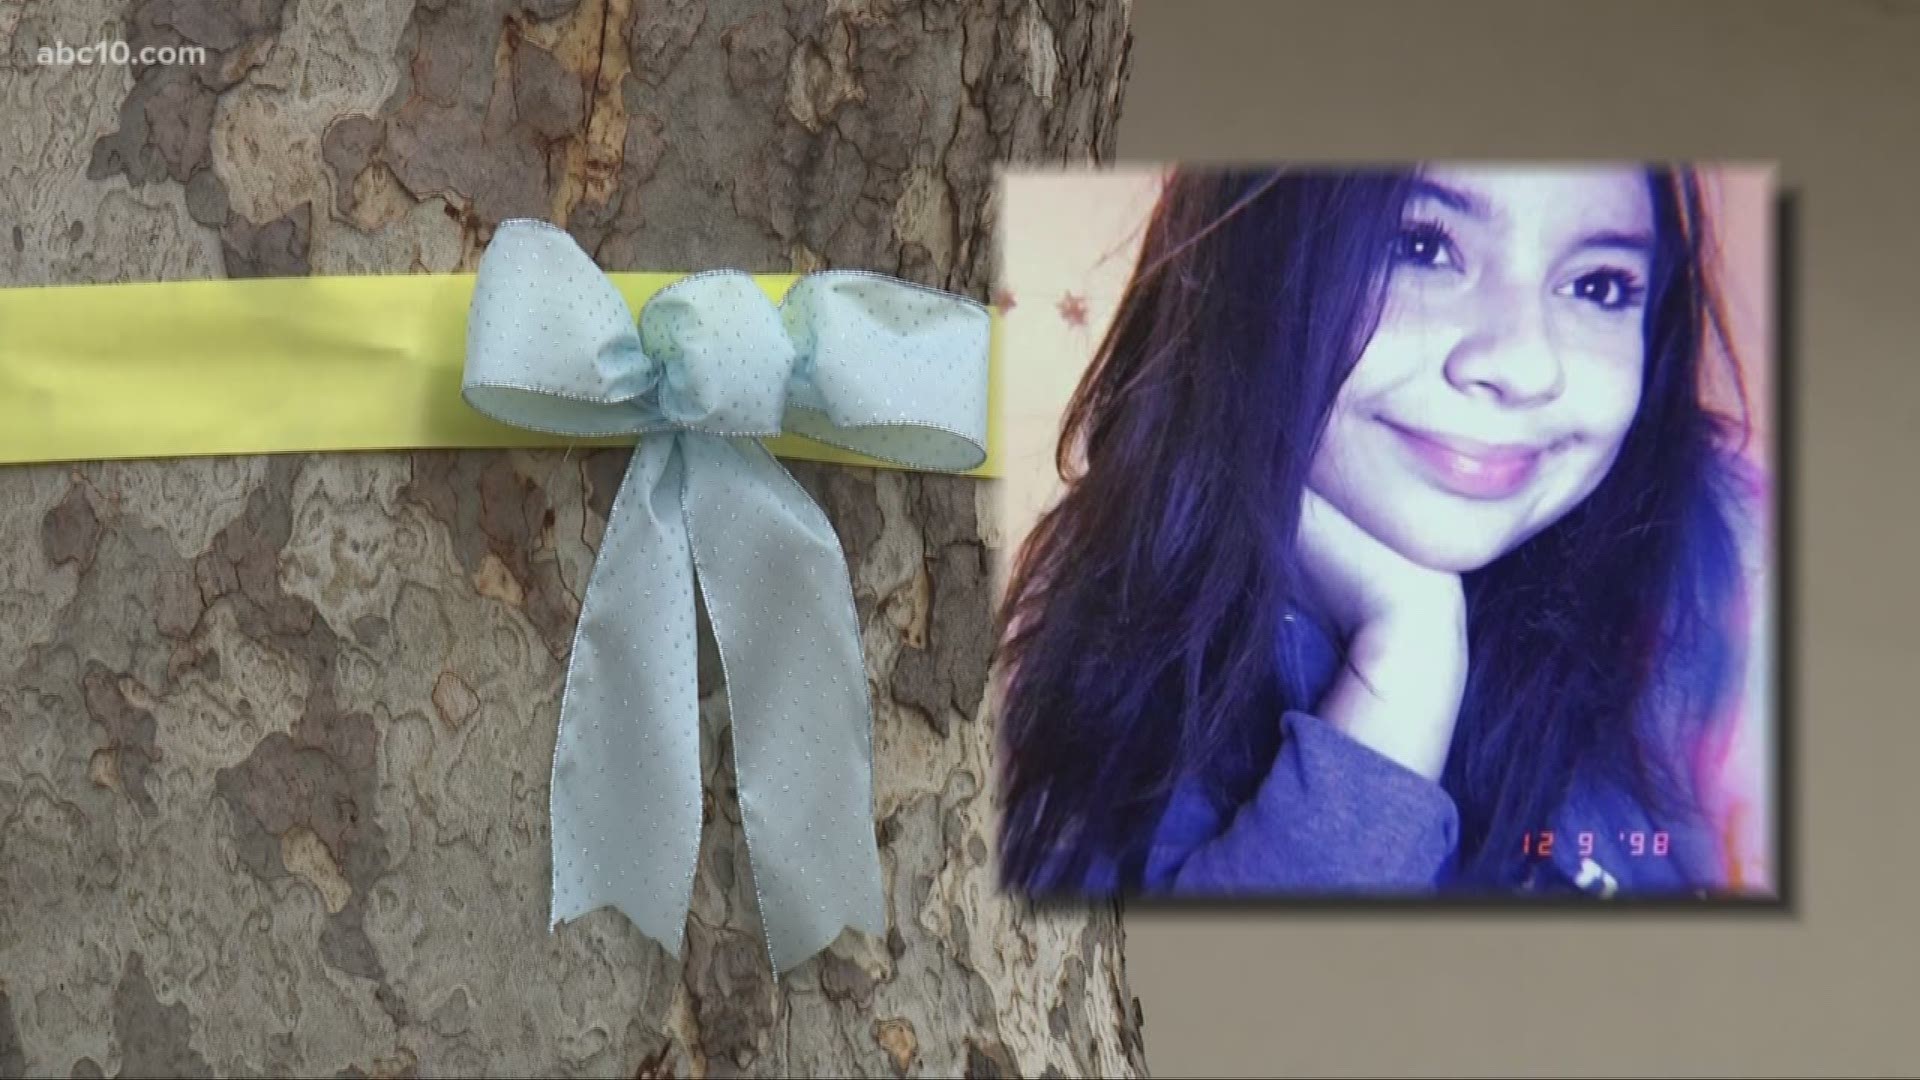 A Turlock community stepped forward with a fundraiser effort for a teen girl who was killed in a suspected DUI crash.